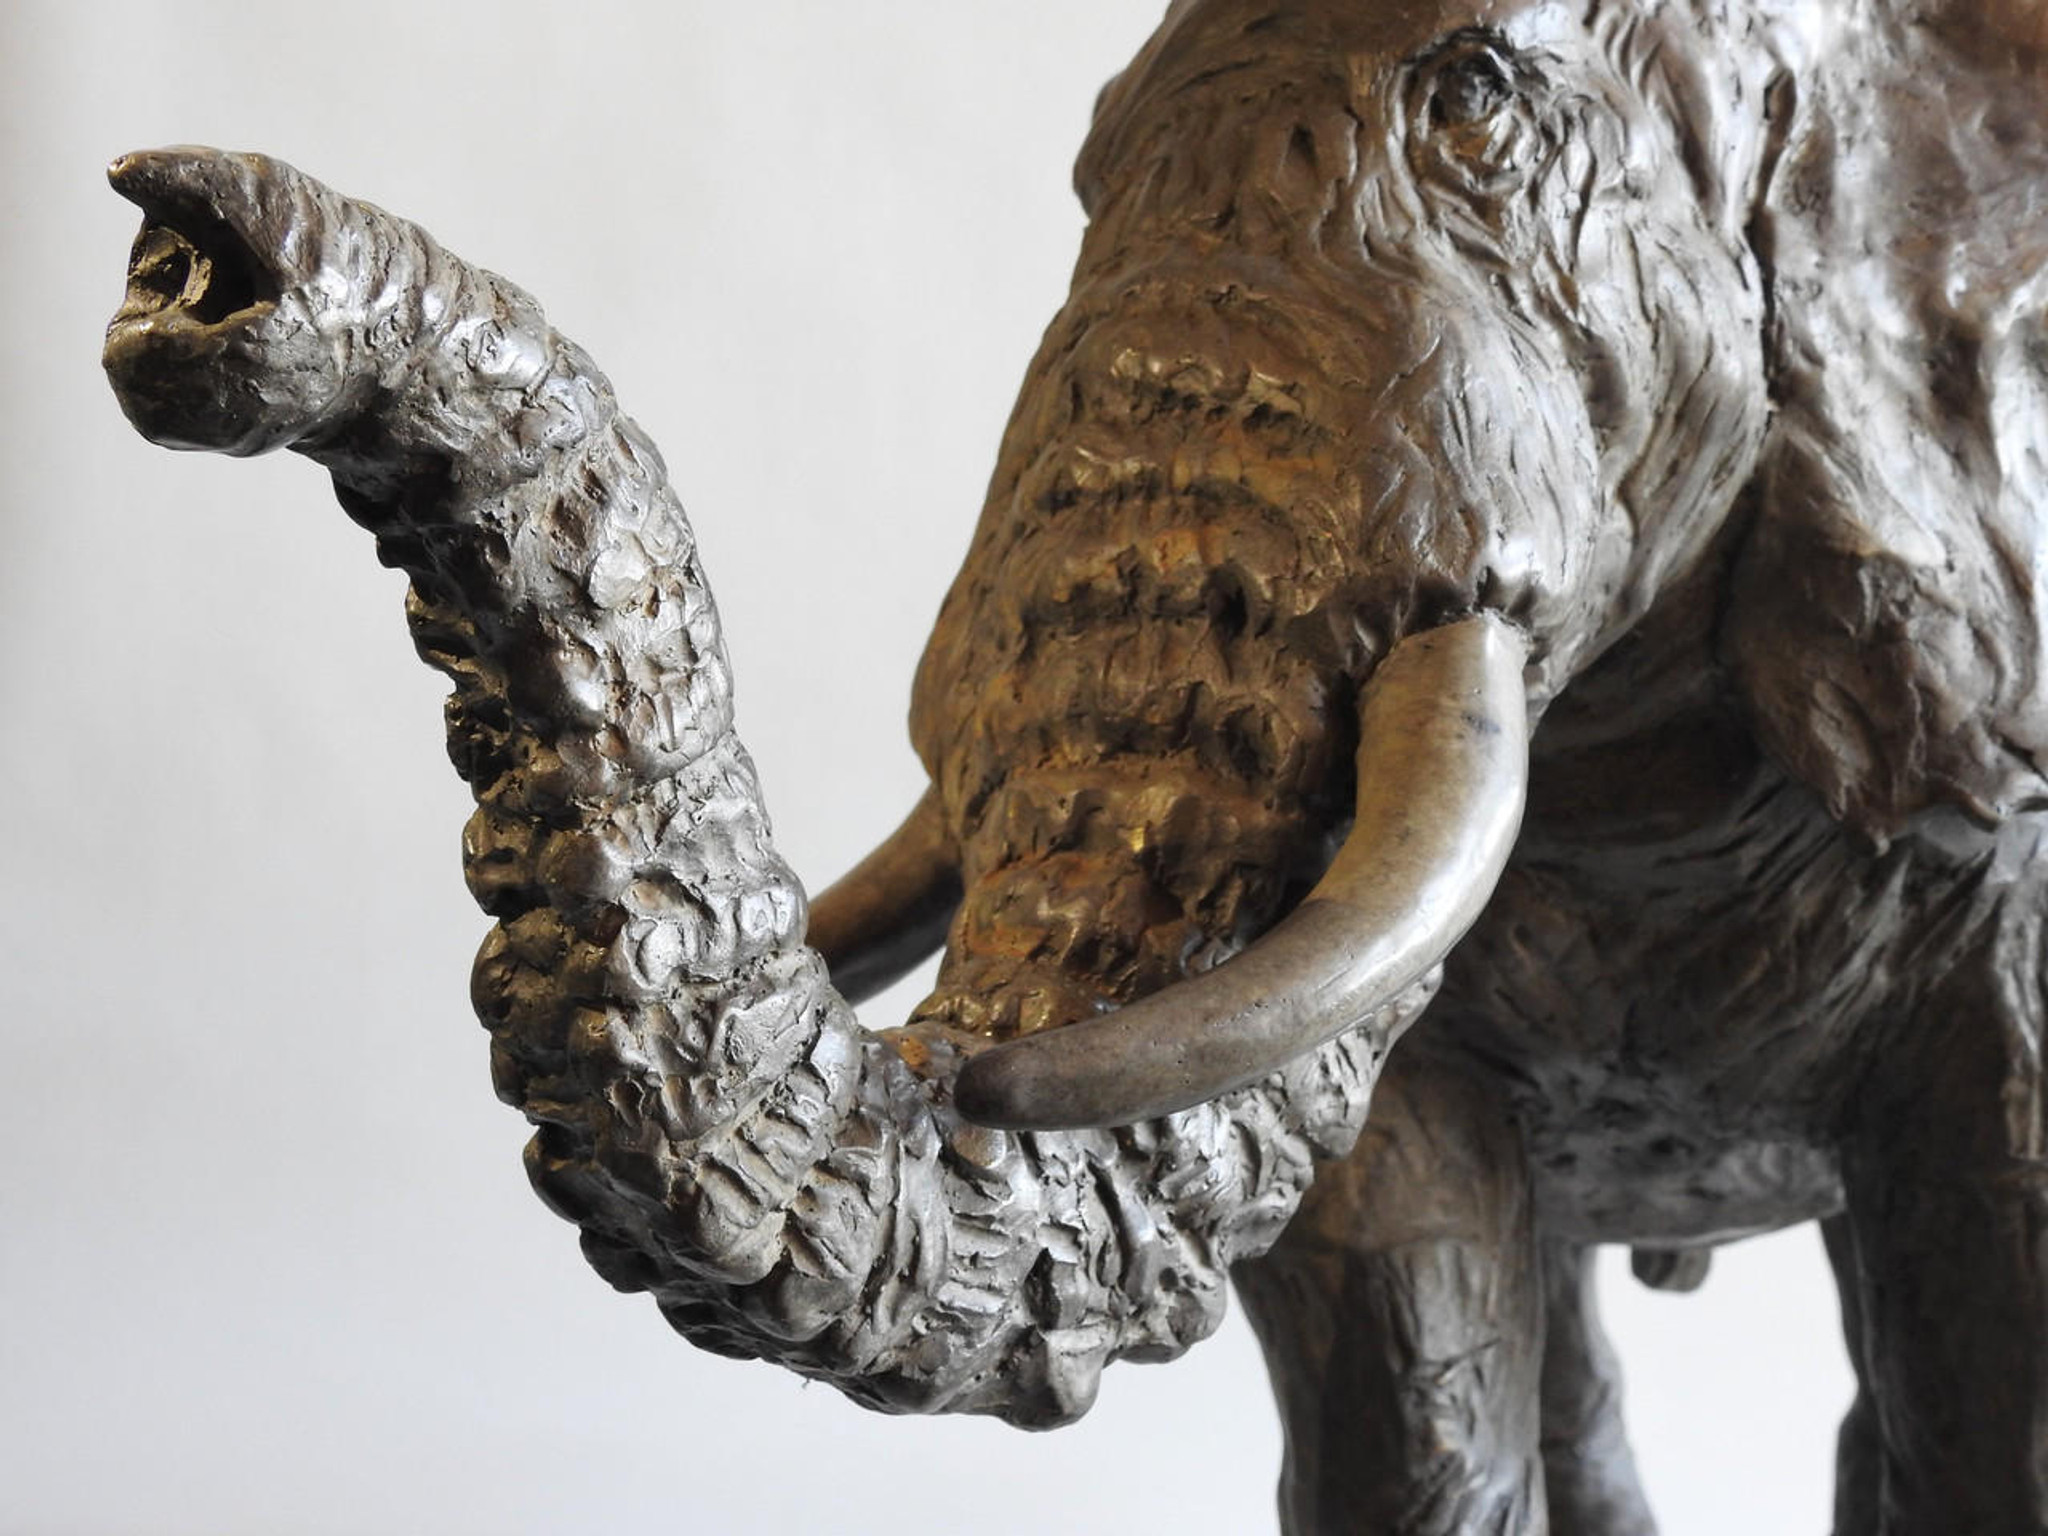 Titan, Large Bronze Elephant Sculpture, 15";  by Kindrie Grove of Canada, Handmade Bronze Sculpture | available in the elk & HAMMER Gallery of Bozeman, Montana; curated by Ashley Childs, artist, maker, owner and creative director of elk & HAMMER.